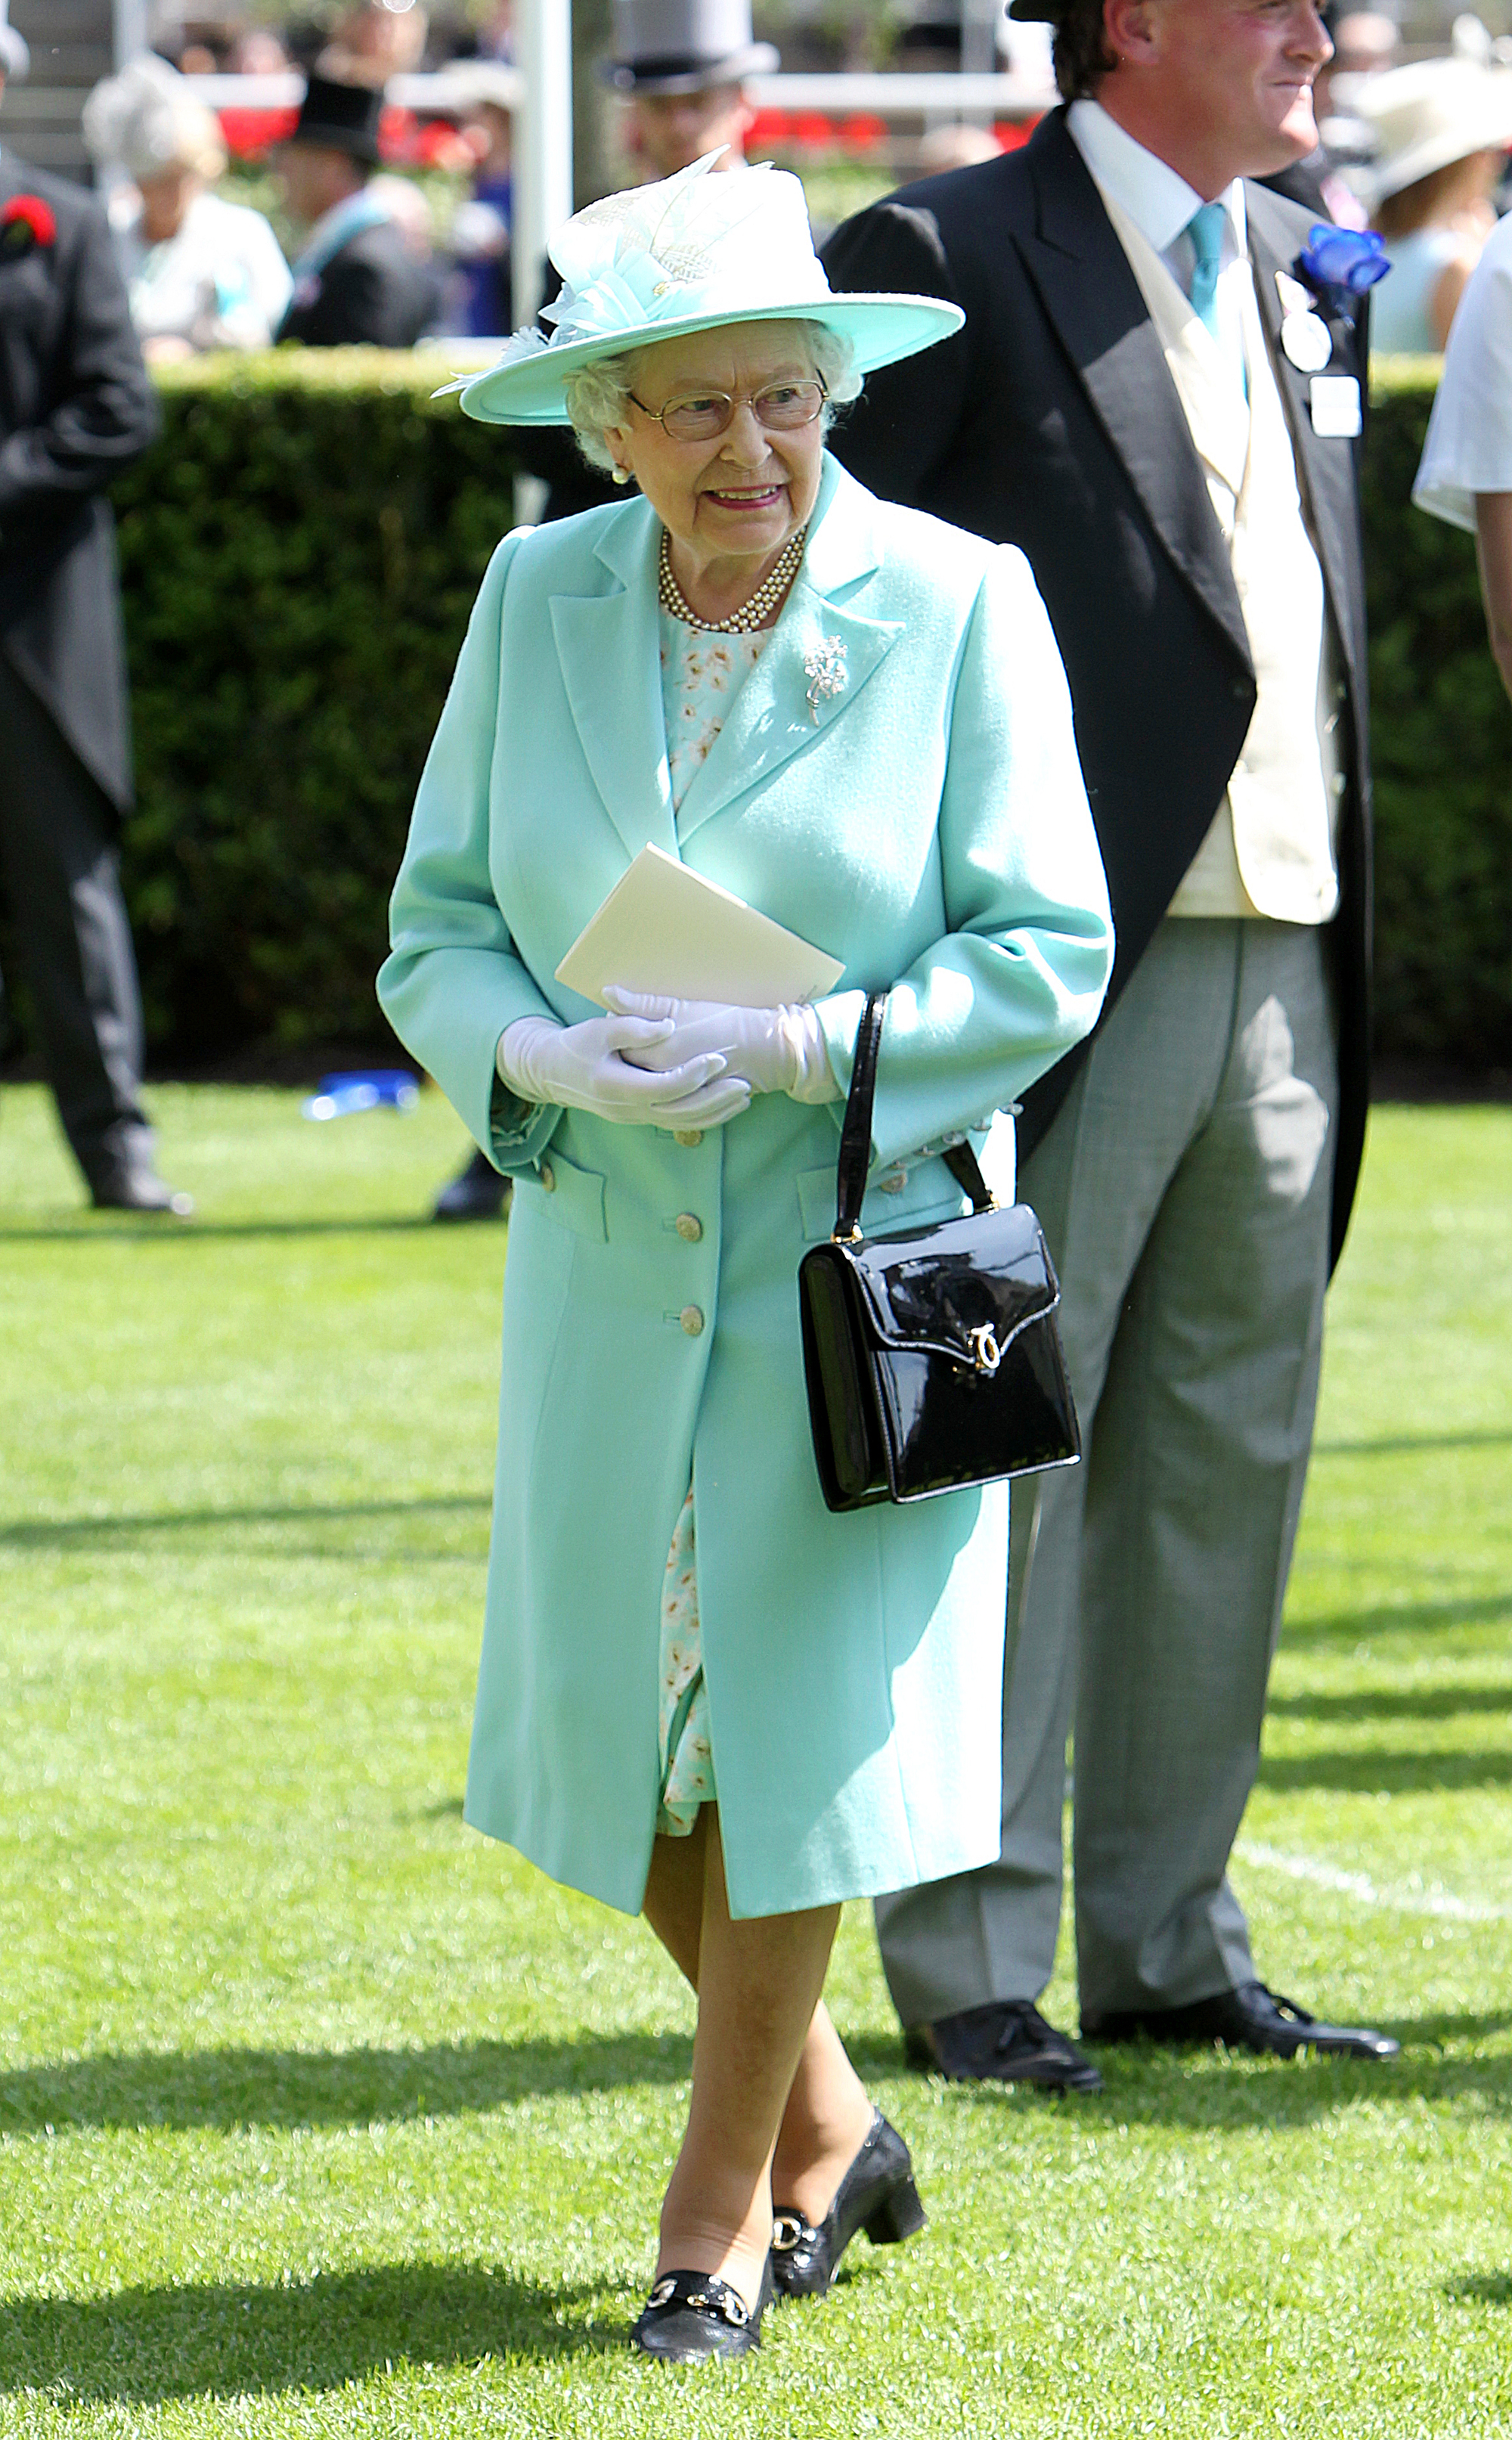 The Queen at Ascot in 2015